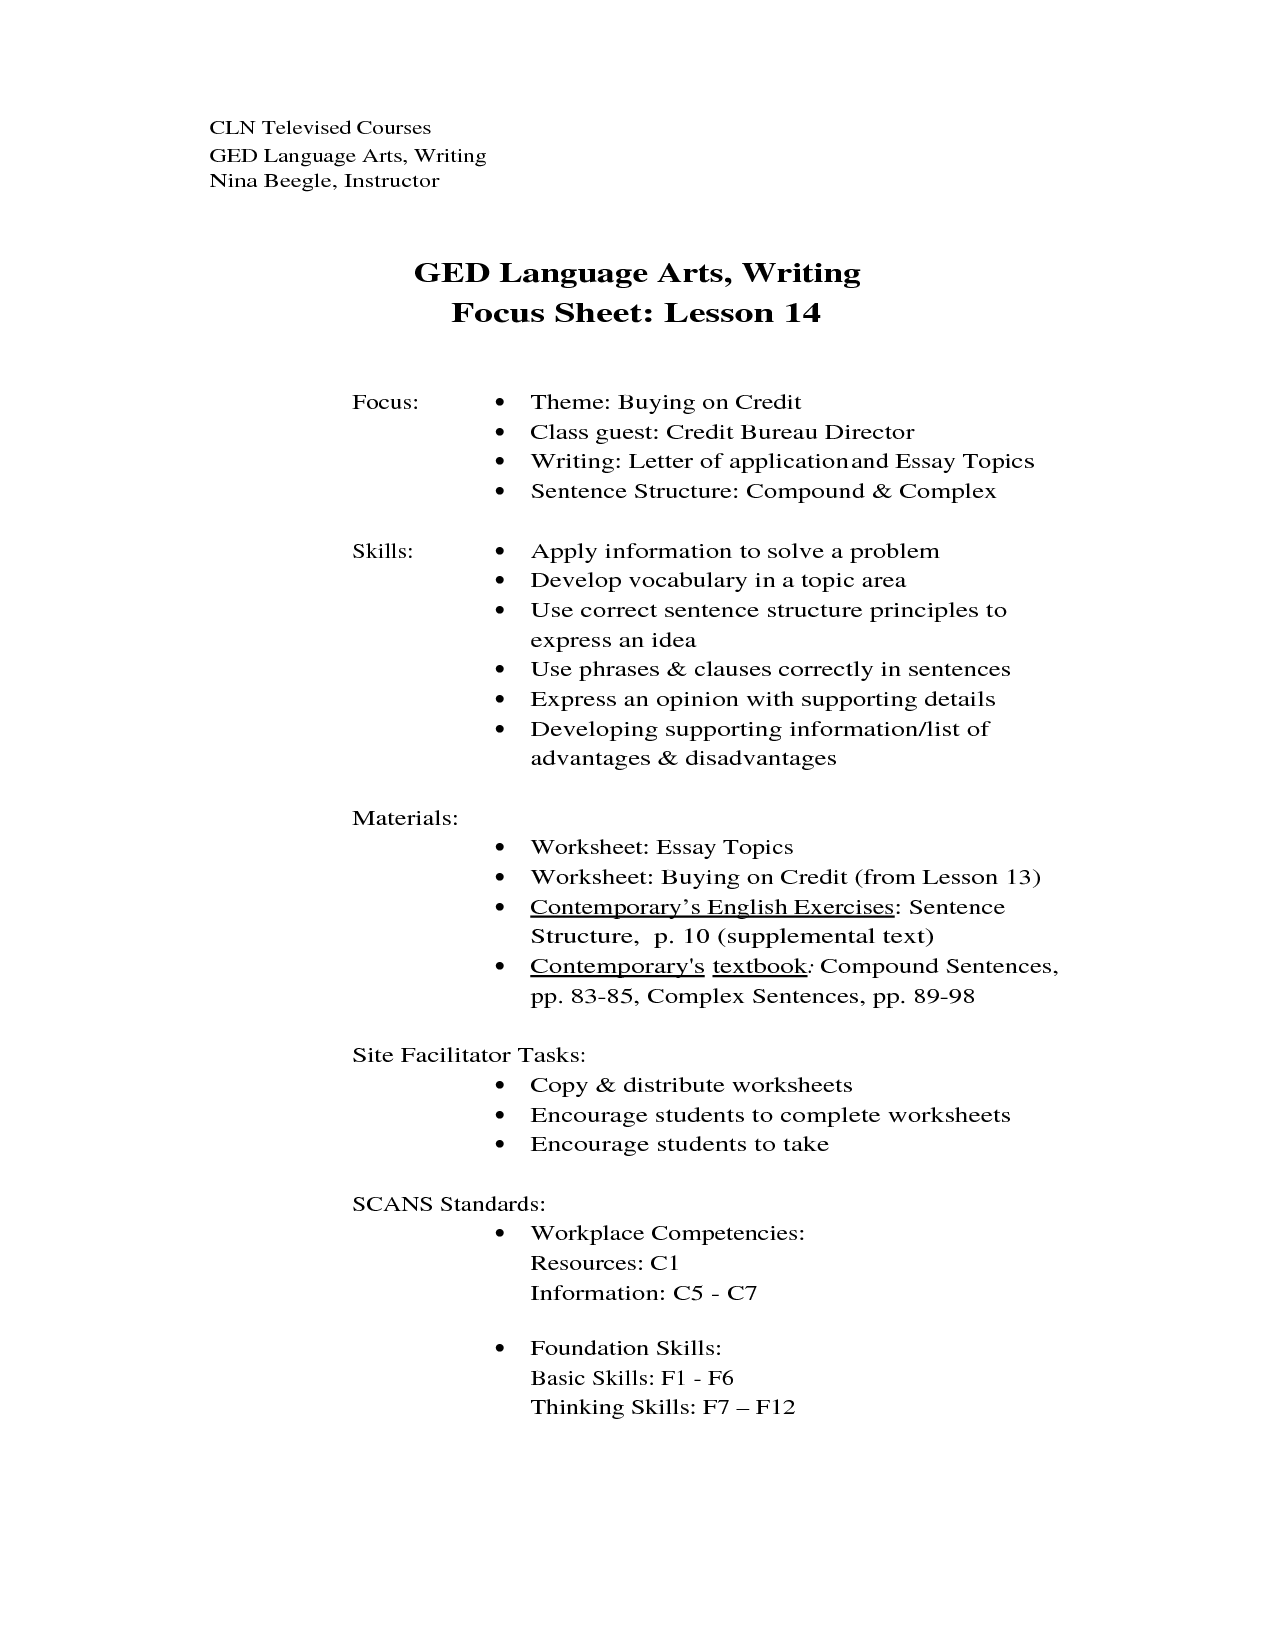 Practice GED Writing Test Worksheets Image